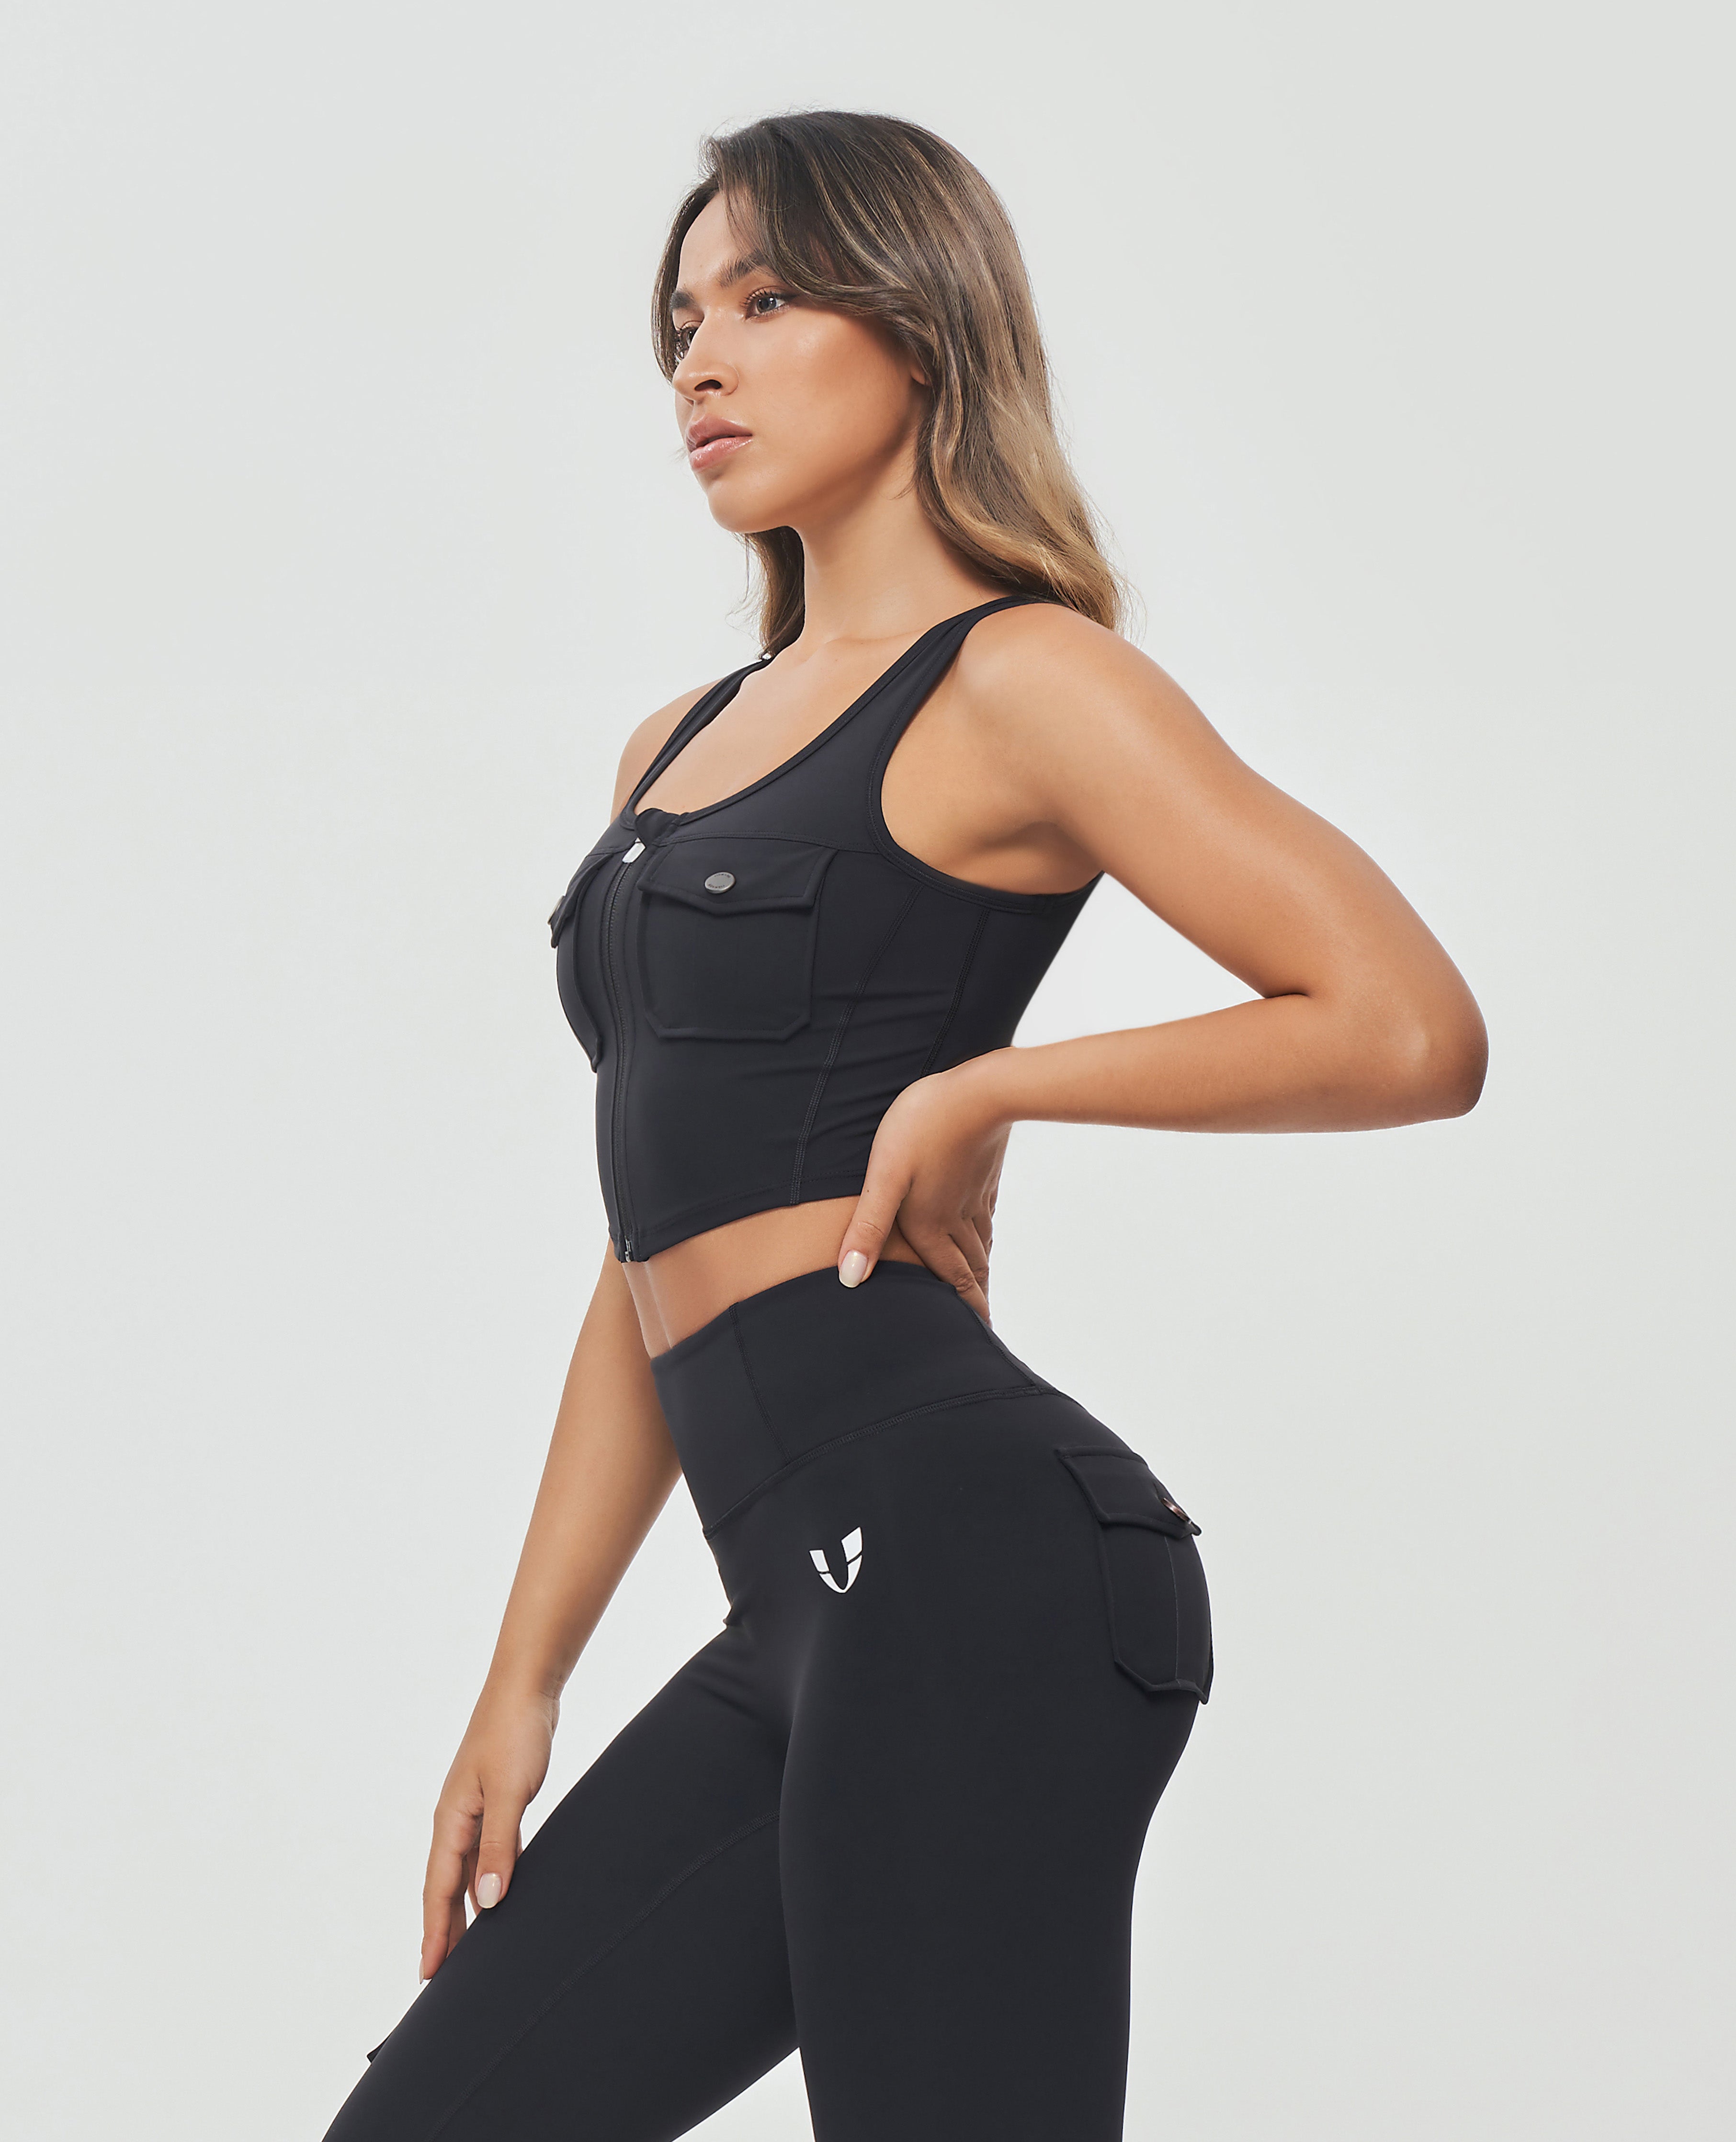 New Releases Activewear, Workout Clothes